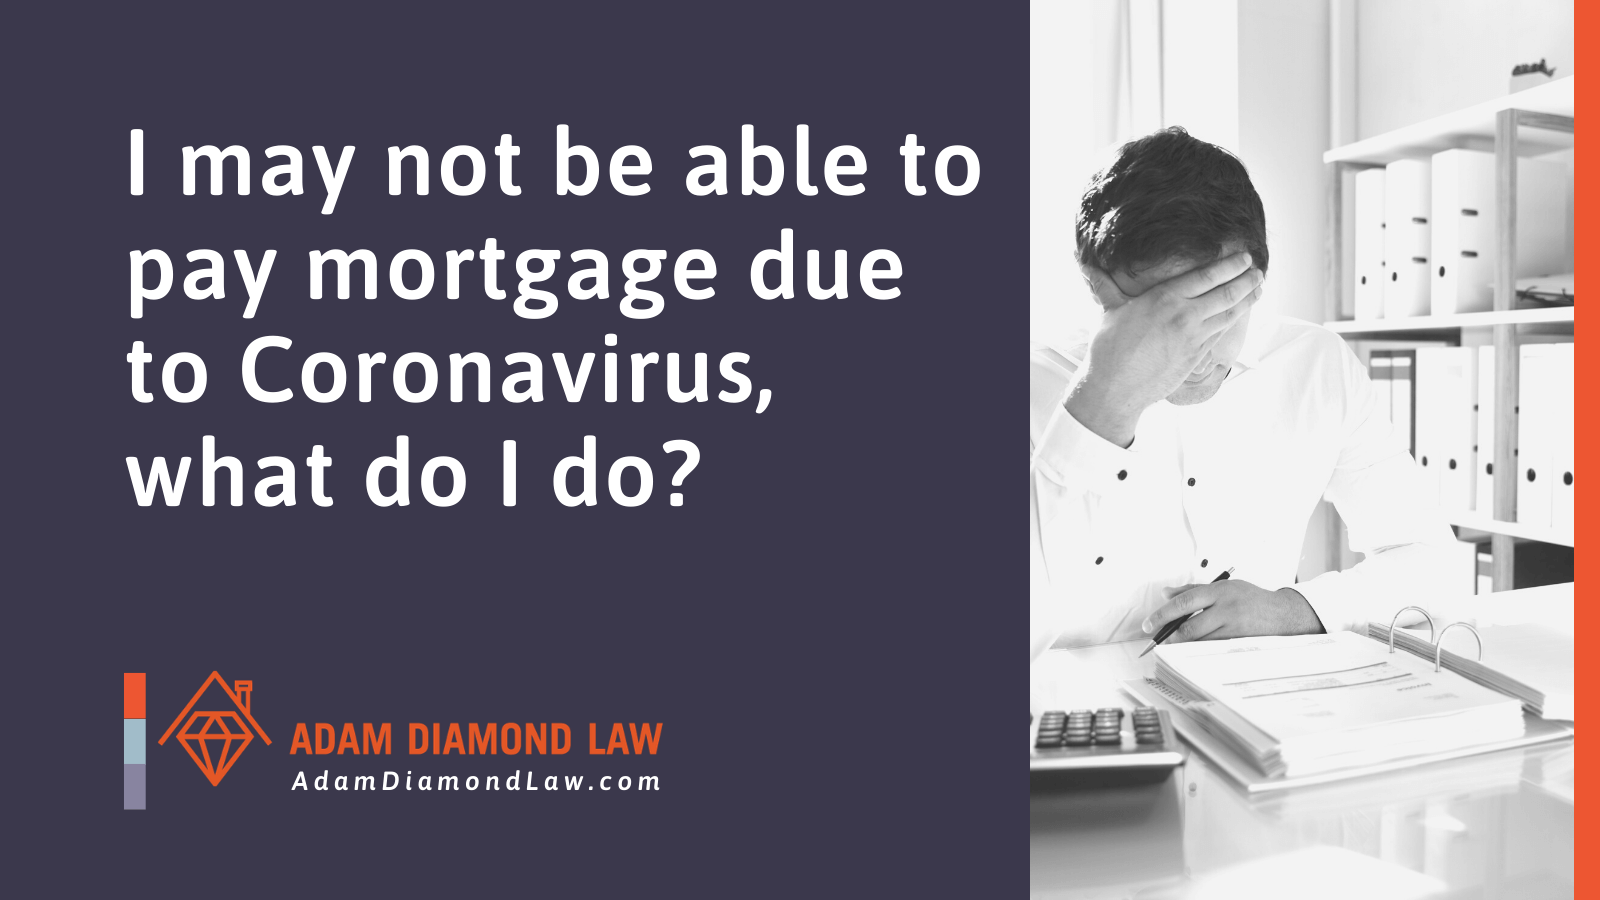 I may not be able to pay mortgage due to Coronavirus, what do I do - Adam Diamond Law | McHenry, IL Residential Real Estate Lawyer